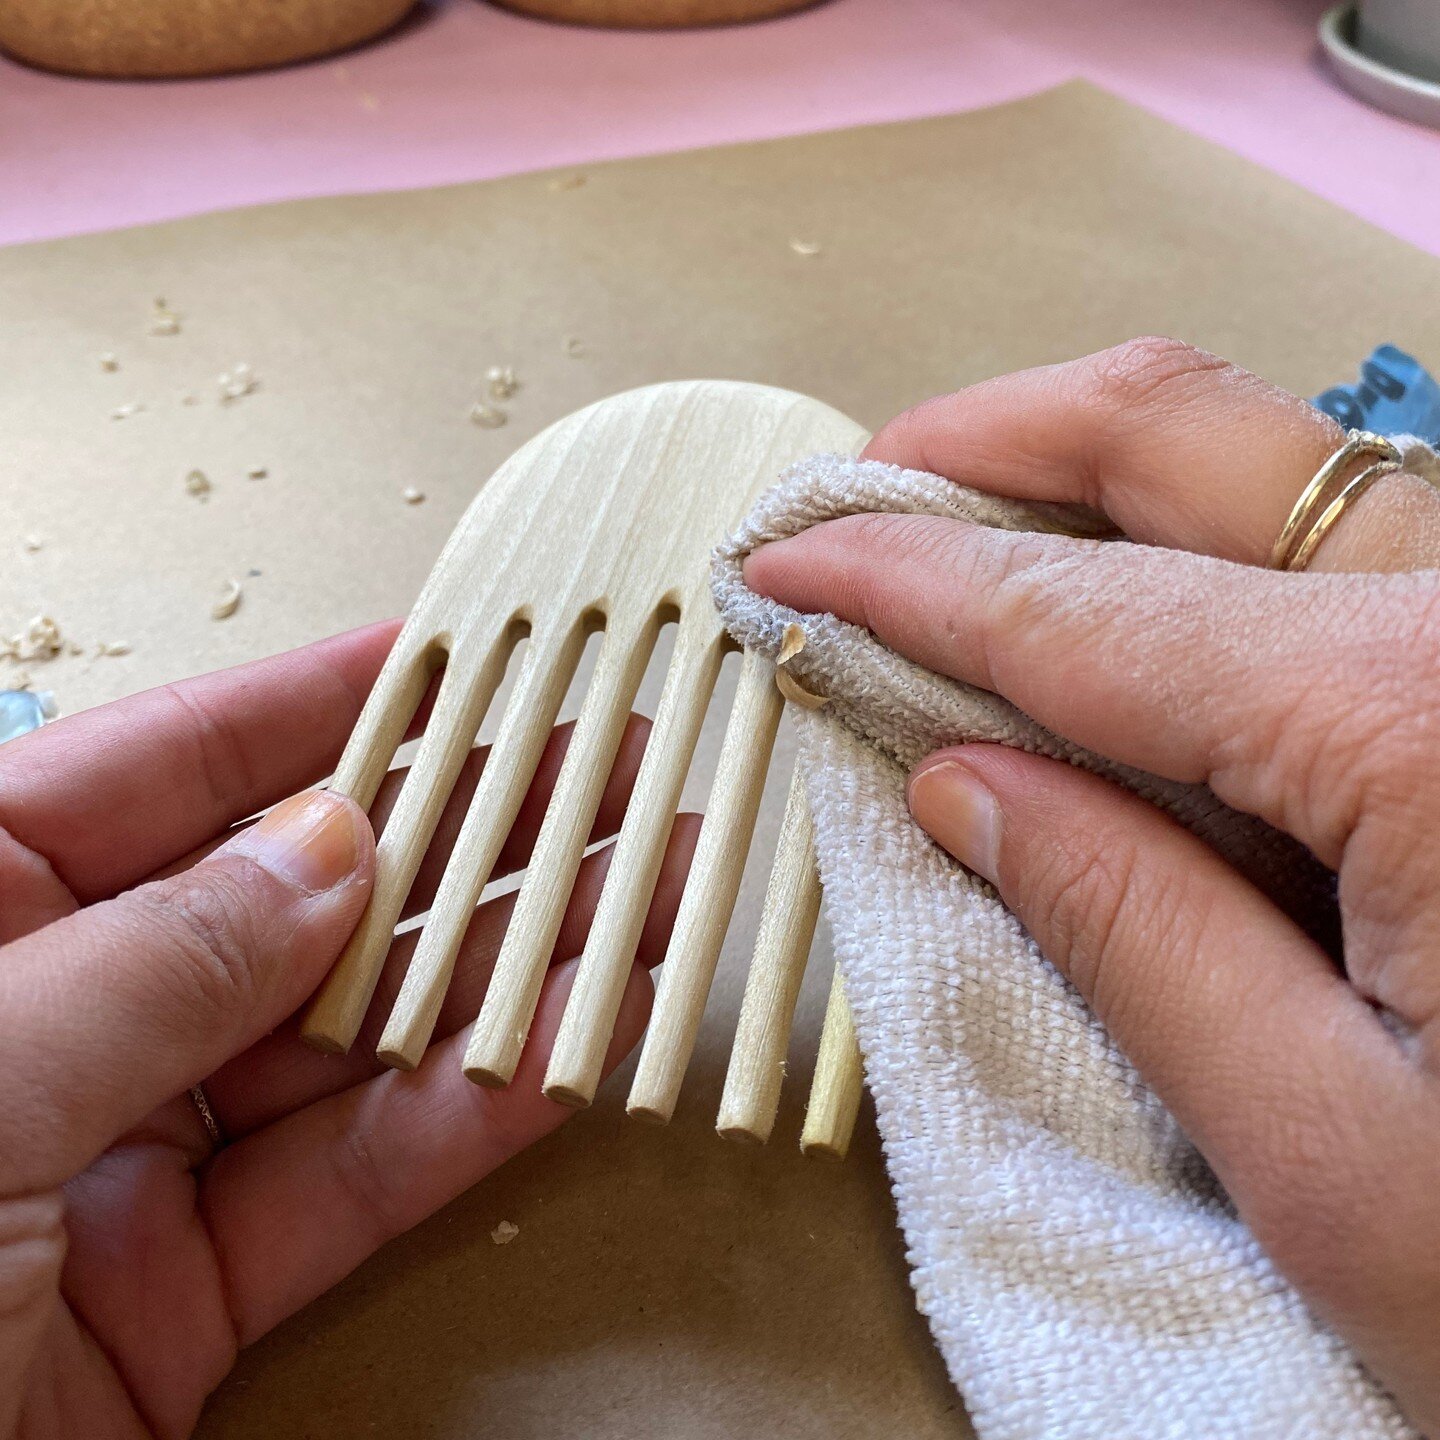 Sanding a finished project is the best part 😍 Can't wait to carve this Arch Comb with you guys! #melscarvingclub #handmade #whittling #carving